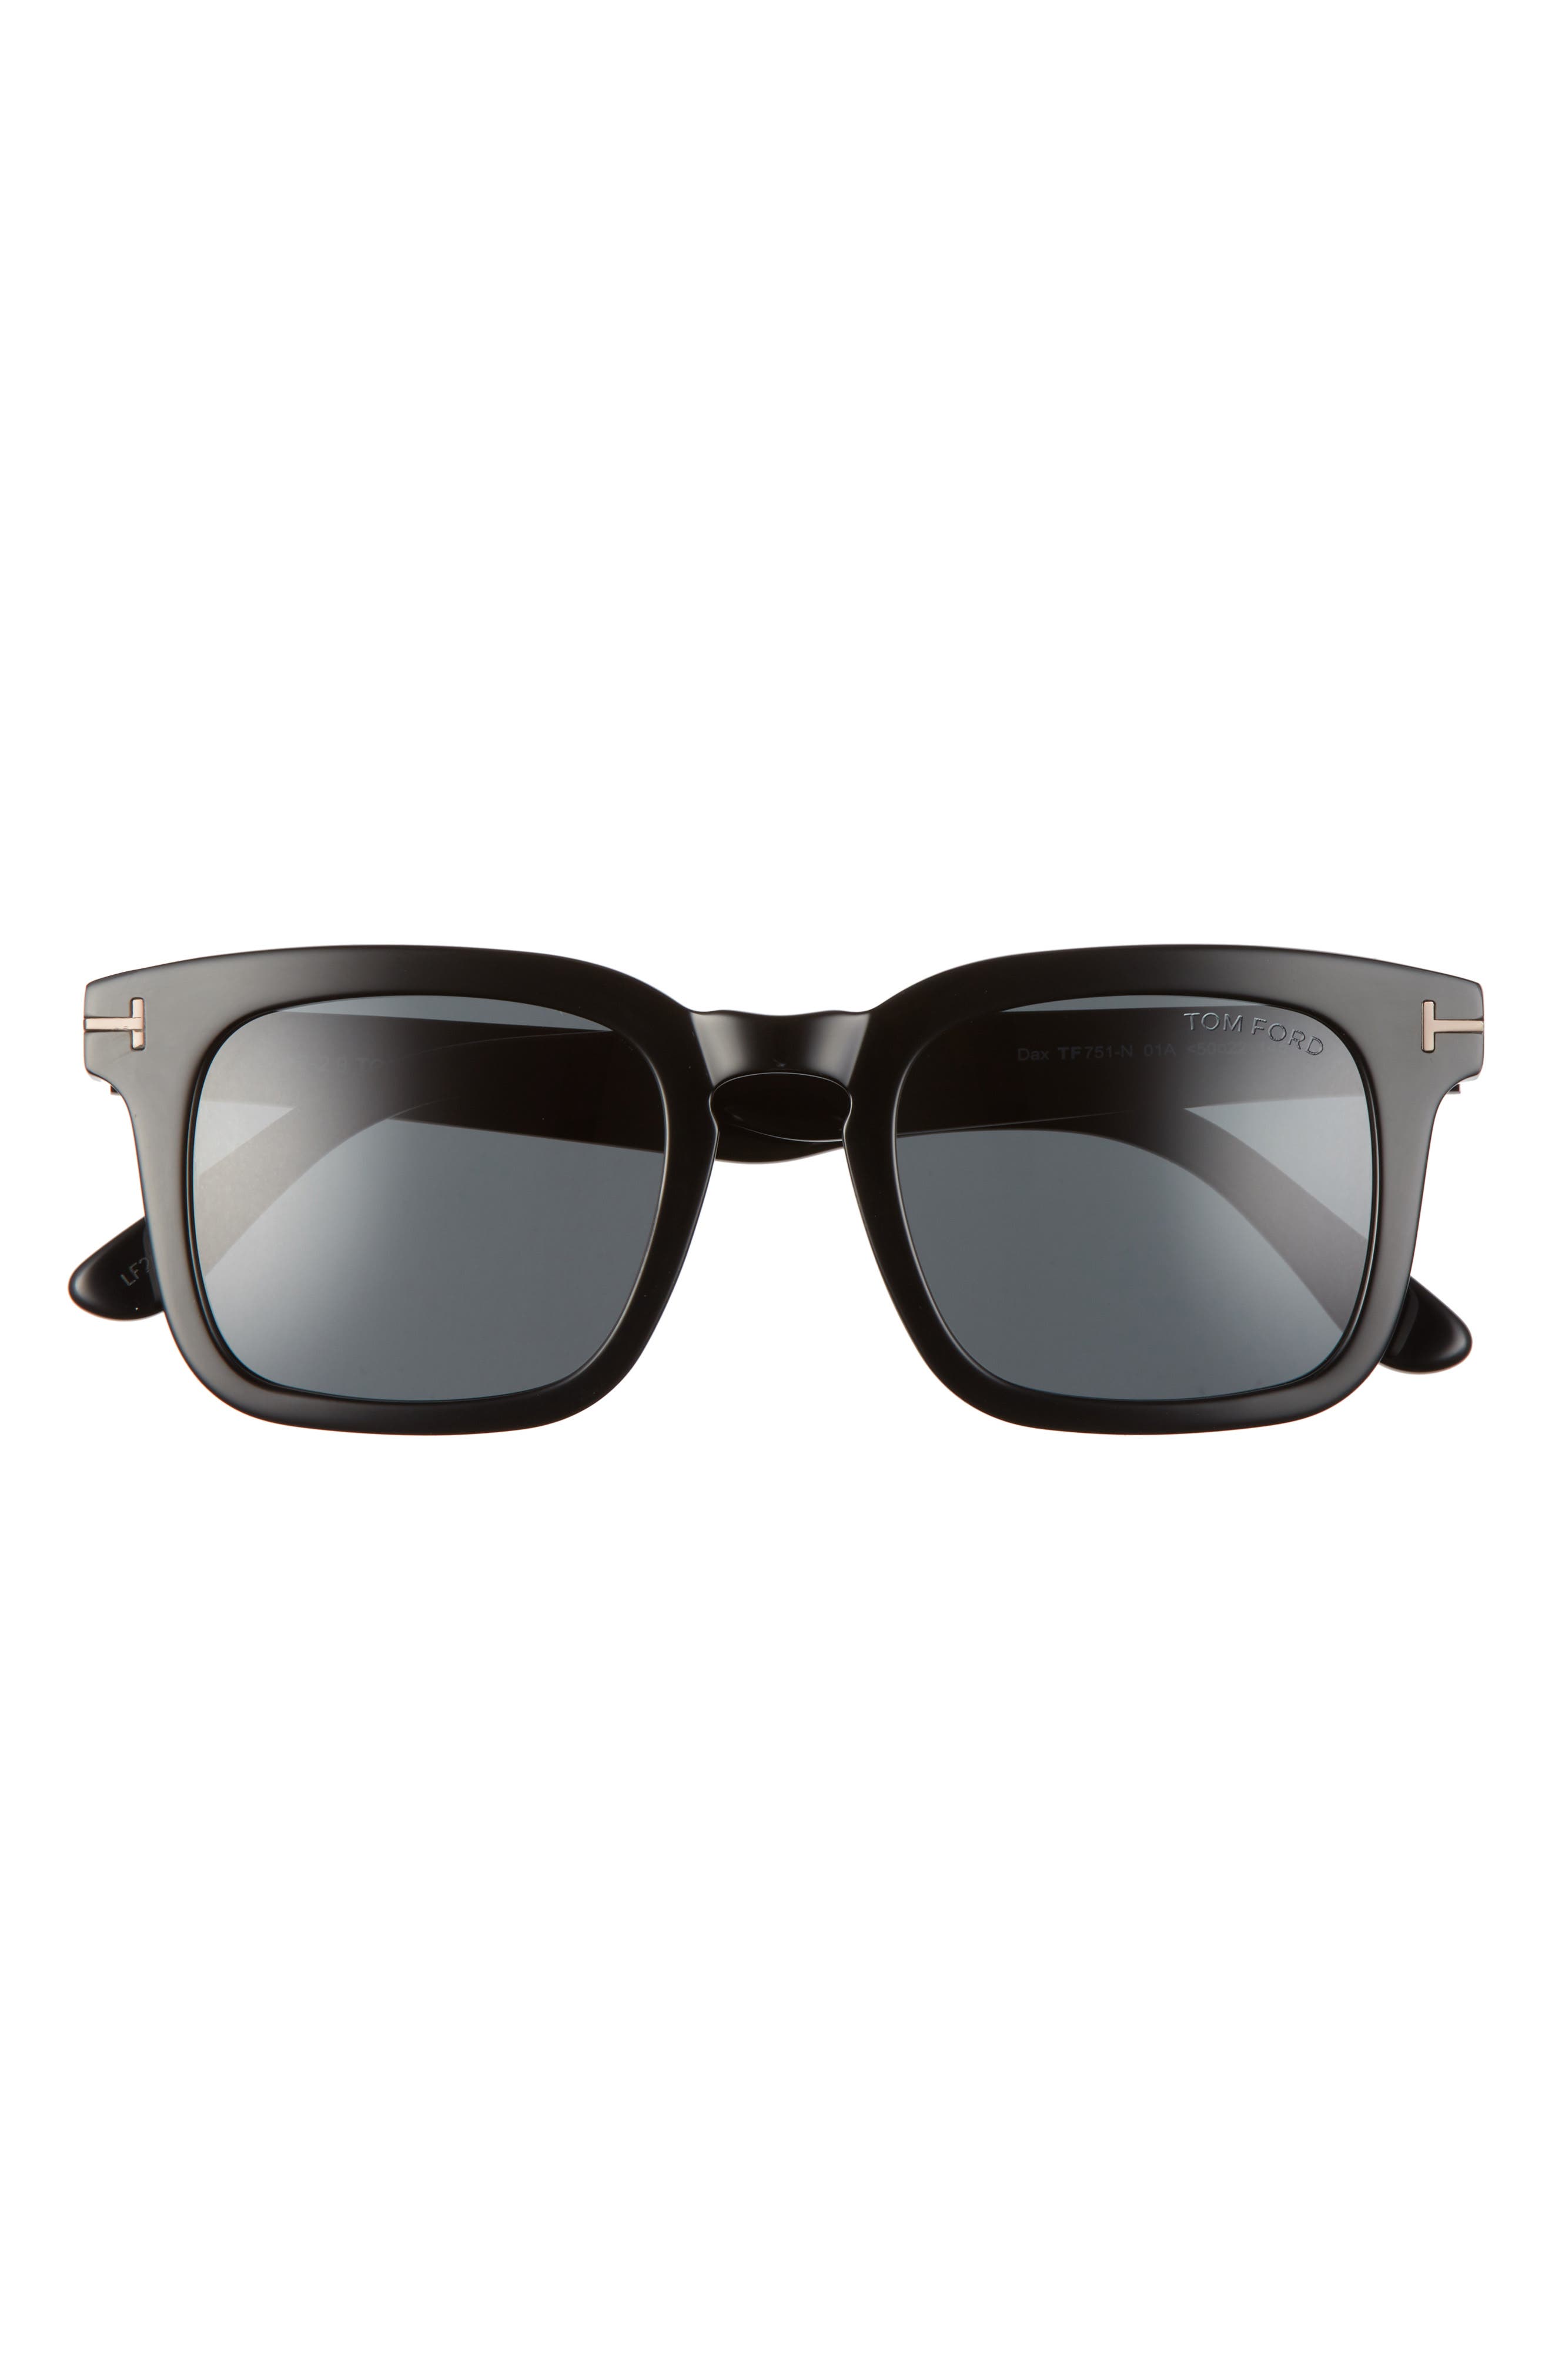 Swag Sunglasses Wild Beast Series with Black Frames and Mirror Smoke Lenses 